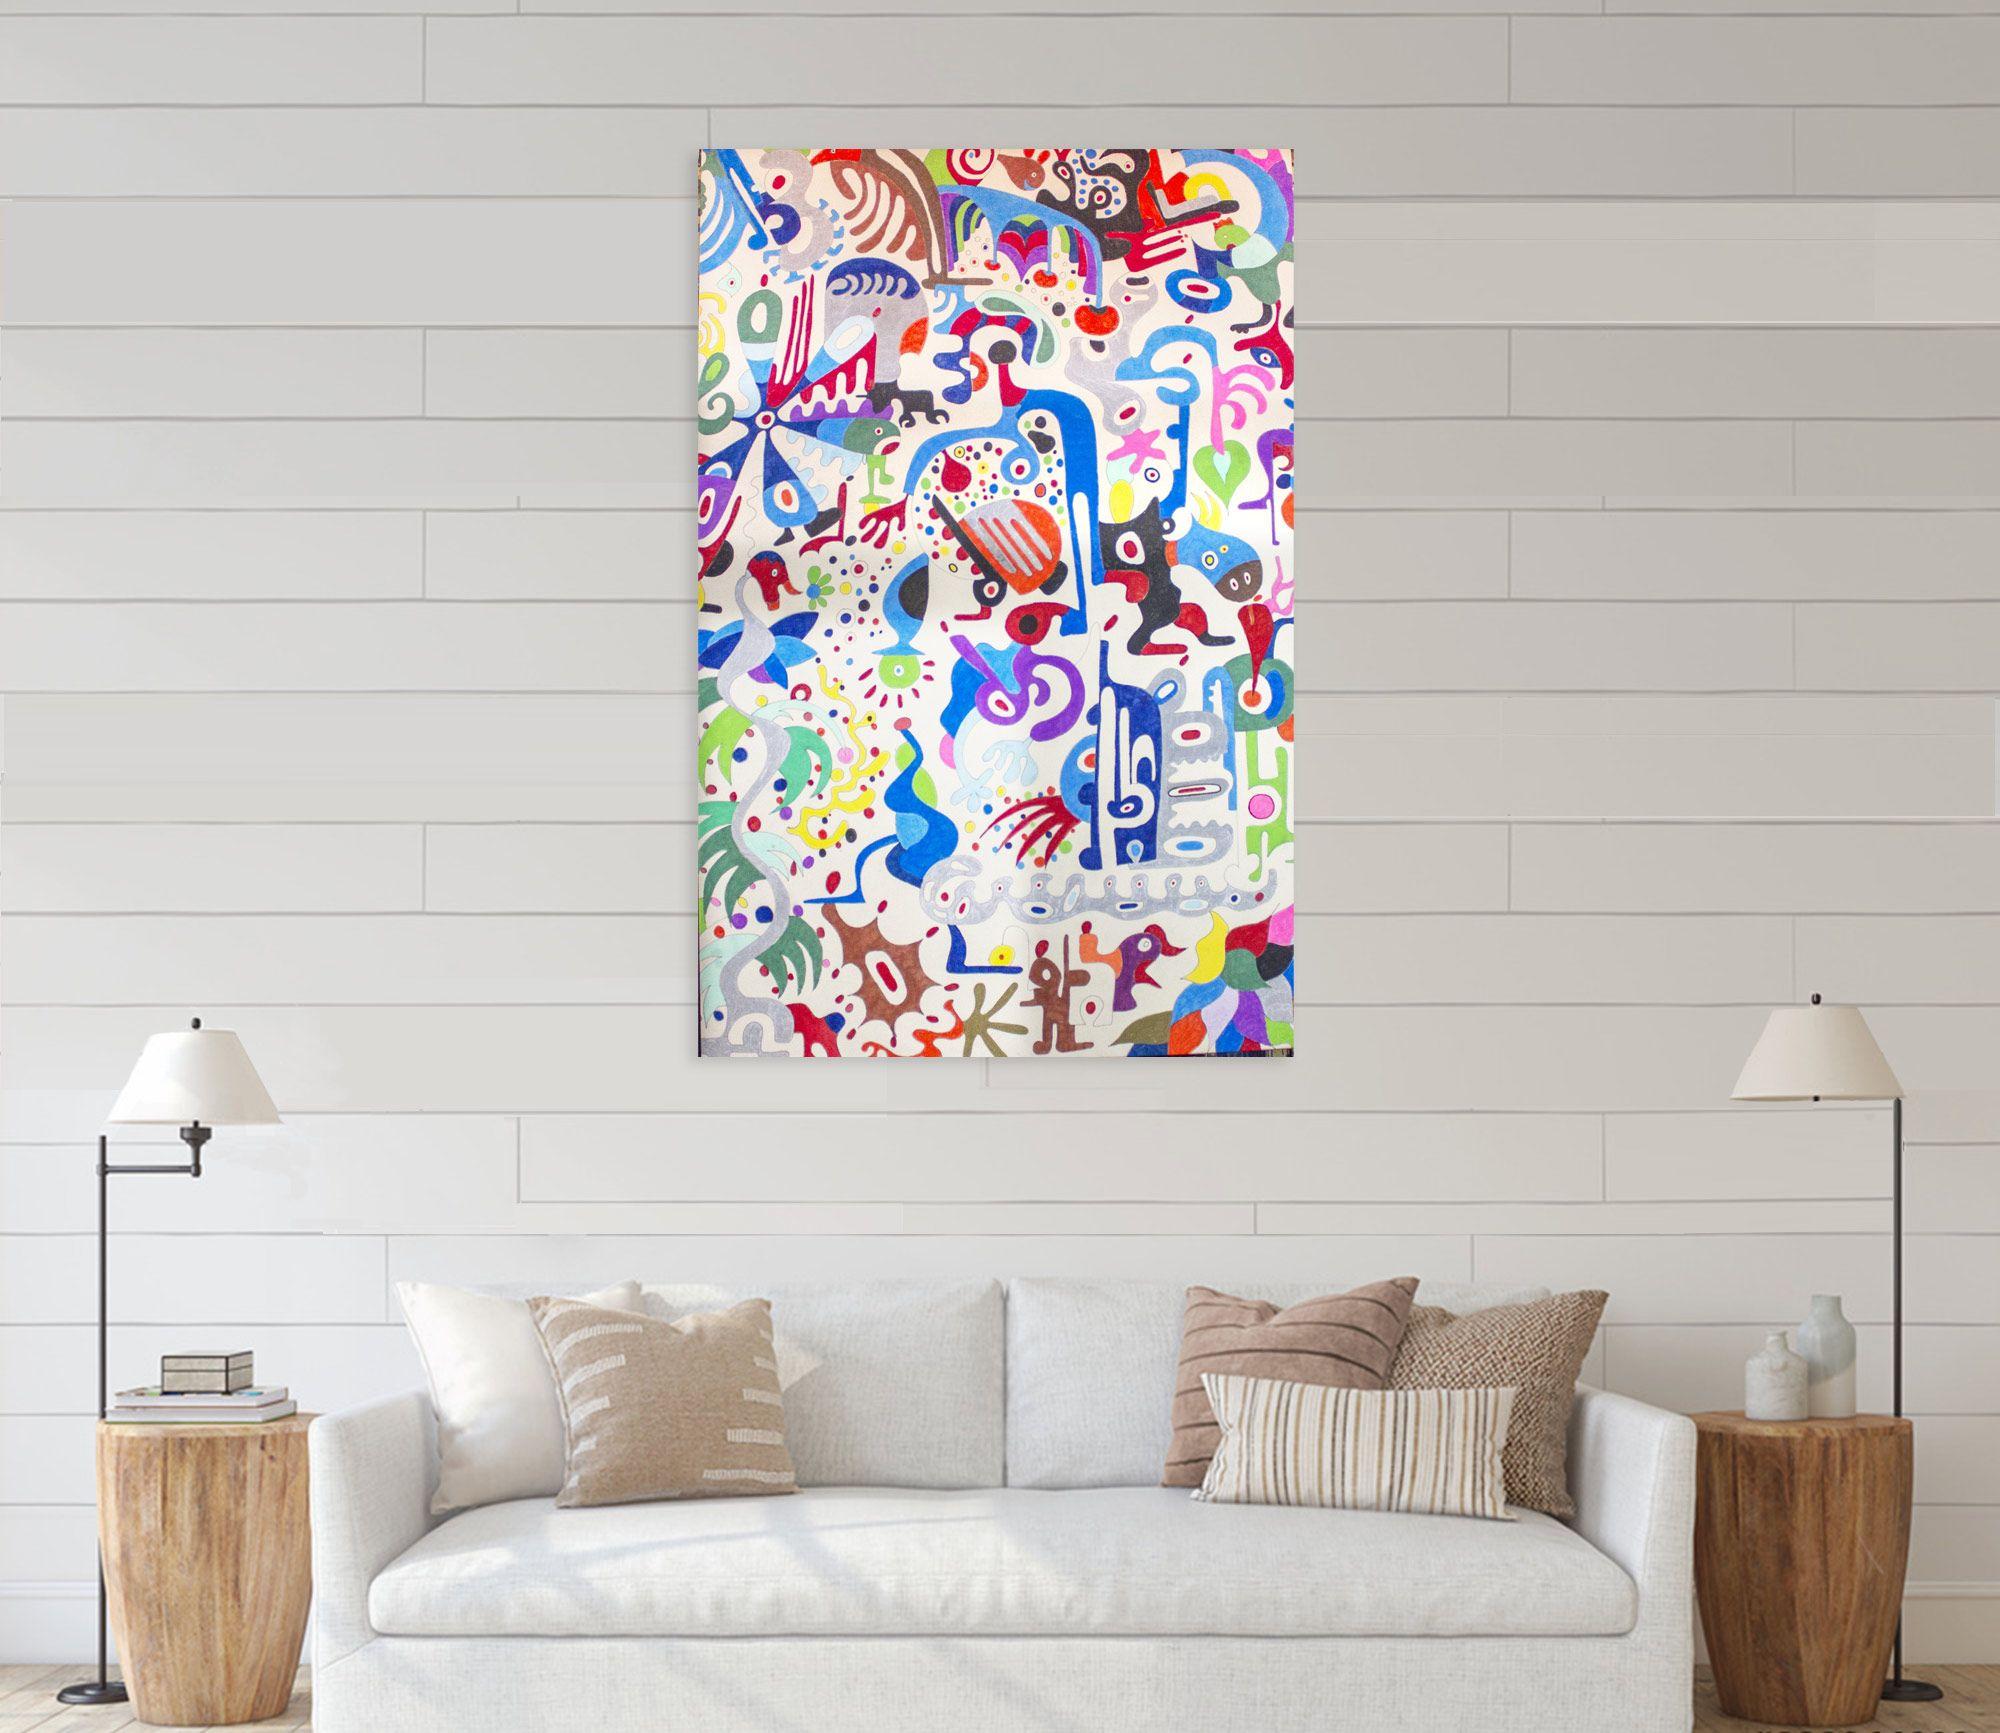 This painting is telling a story. There are a lot of different characters. We all don't see the same things but overall this means love and interaction. :: Painting :: Abstract :: This piece comes with an official certificate of authenticity signed